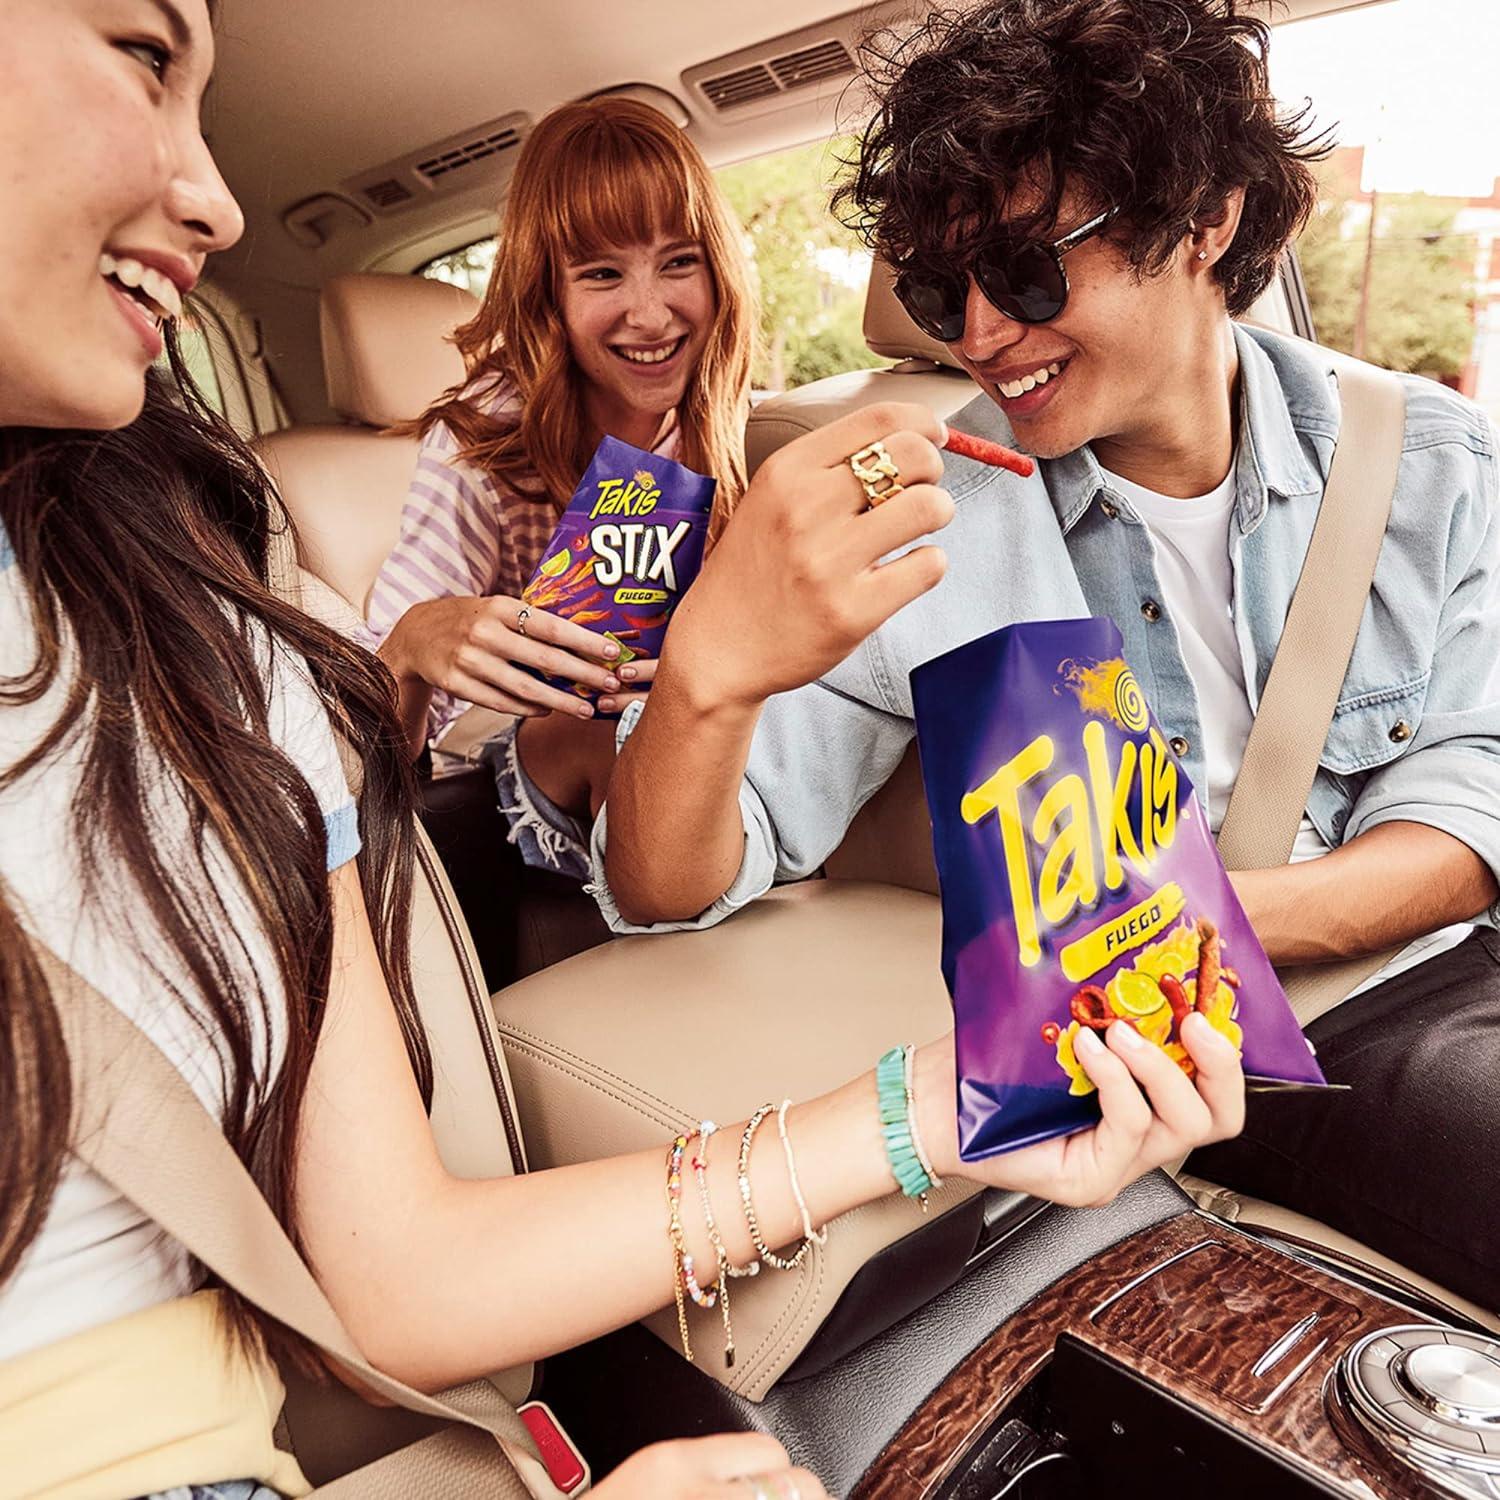 Takis Fuego Rolled Spicy Tortilla Chips, Hot Chili Pepper Lime Flavored Hot  Chips, Multipack 6 Individual Bags, 4 Ounces Each